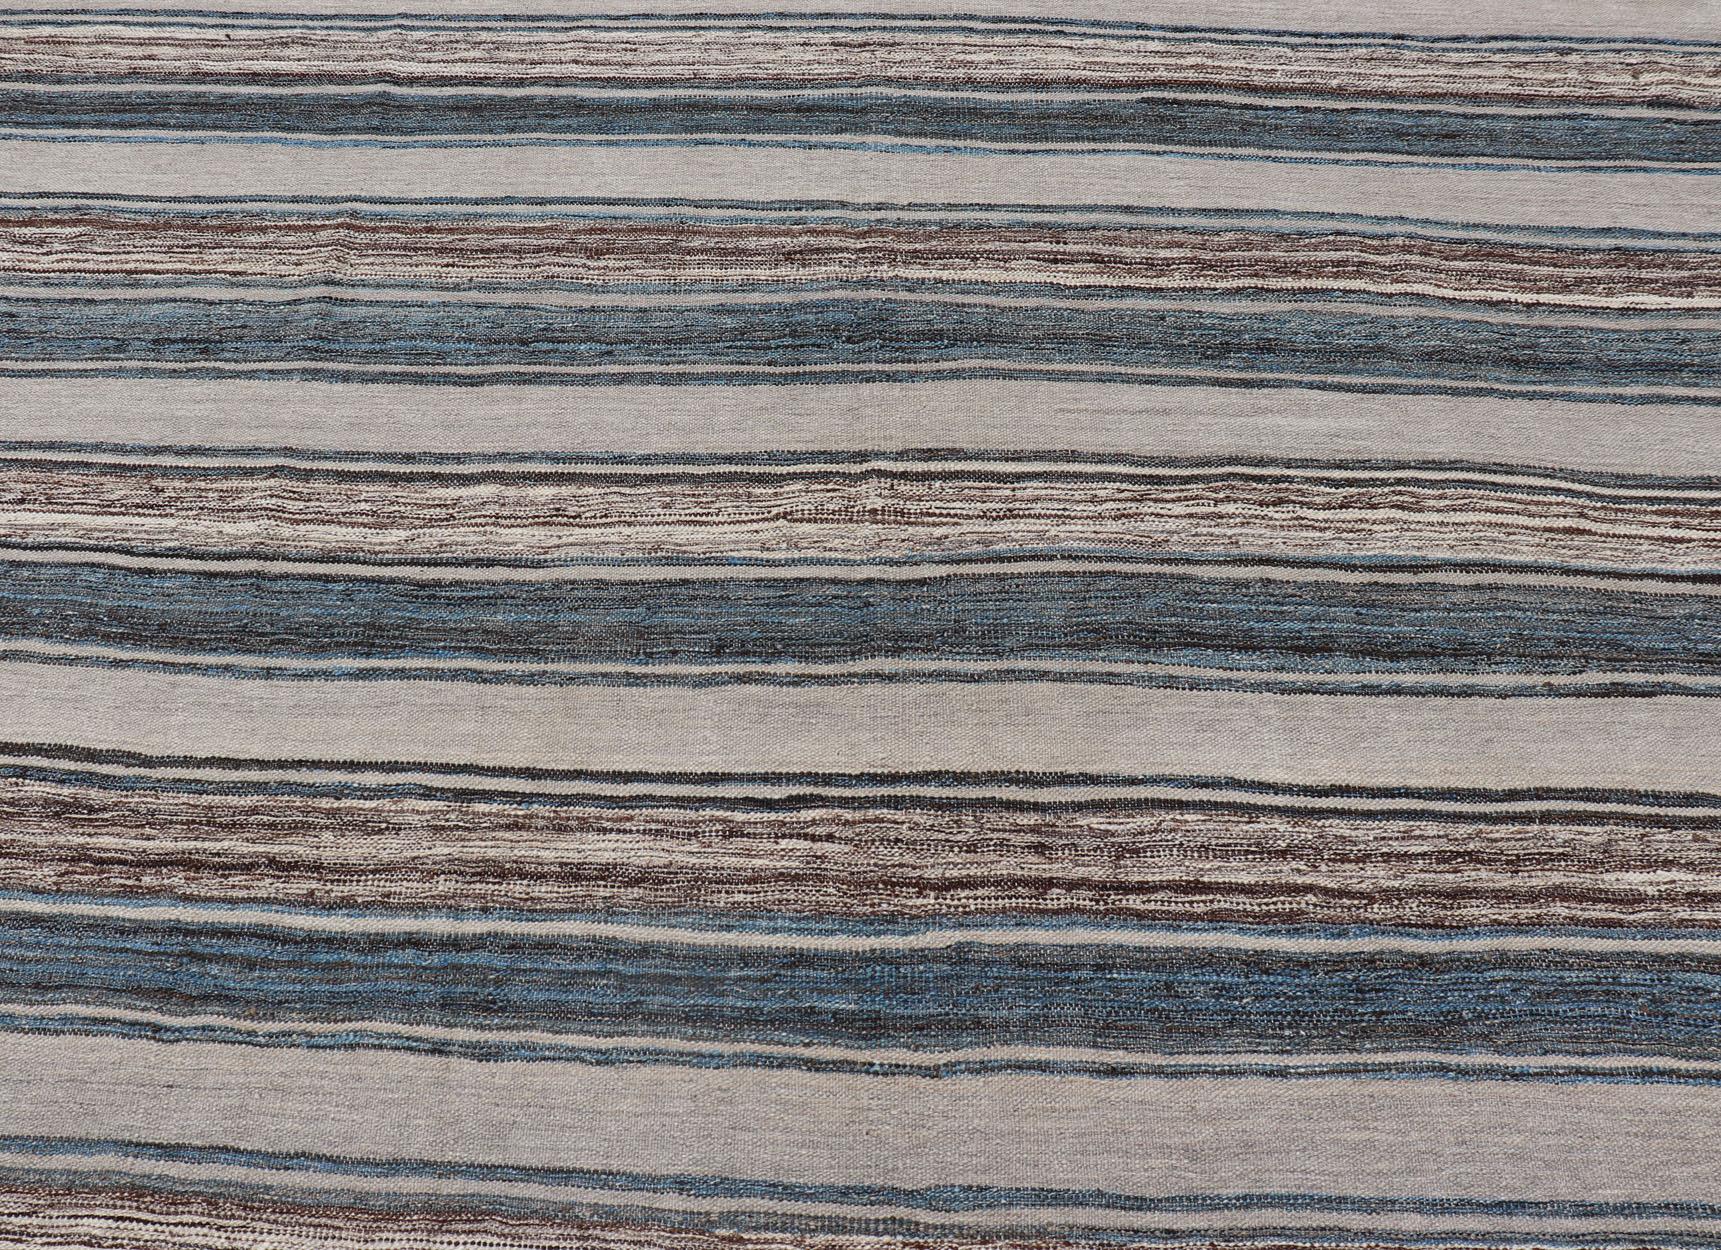 Versatile and Natural Brown, Cream, and Blue Striped Flat-Weave Kilim In New Condition For Sale In Atlanta, GA